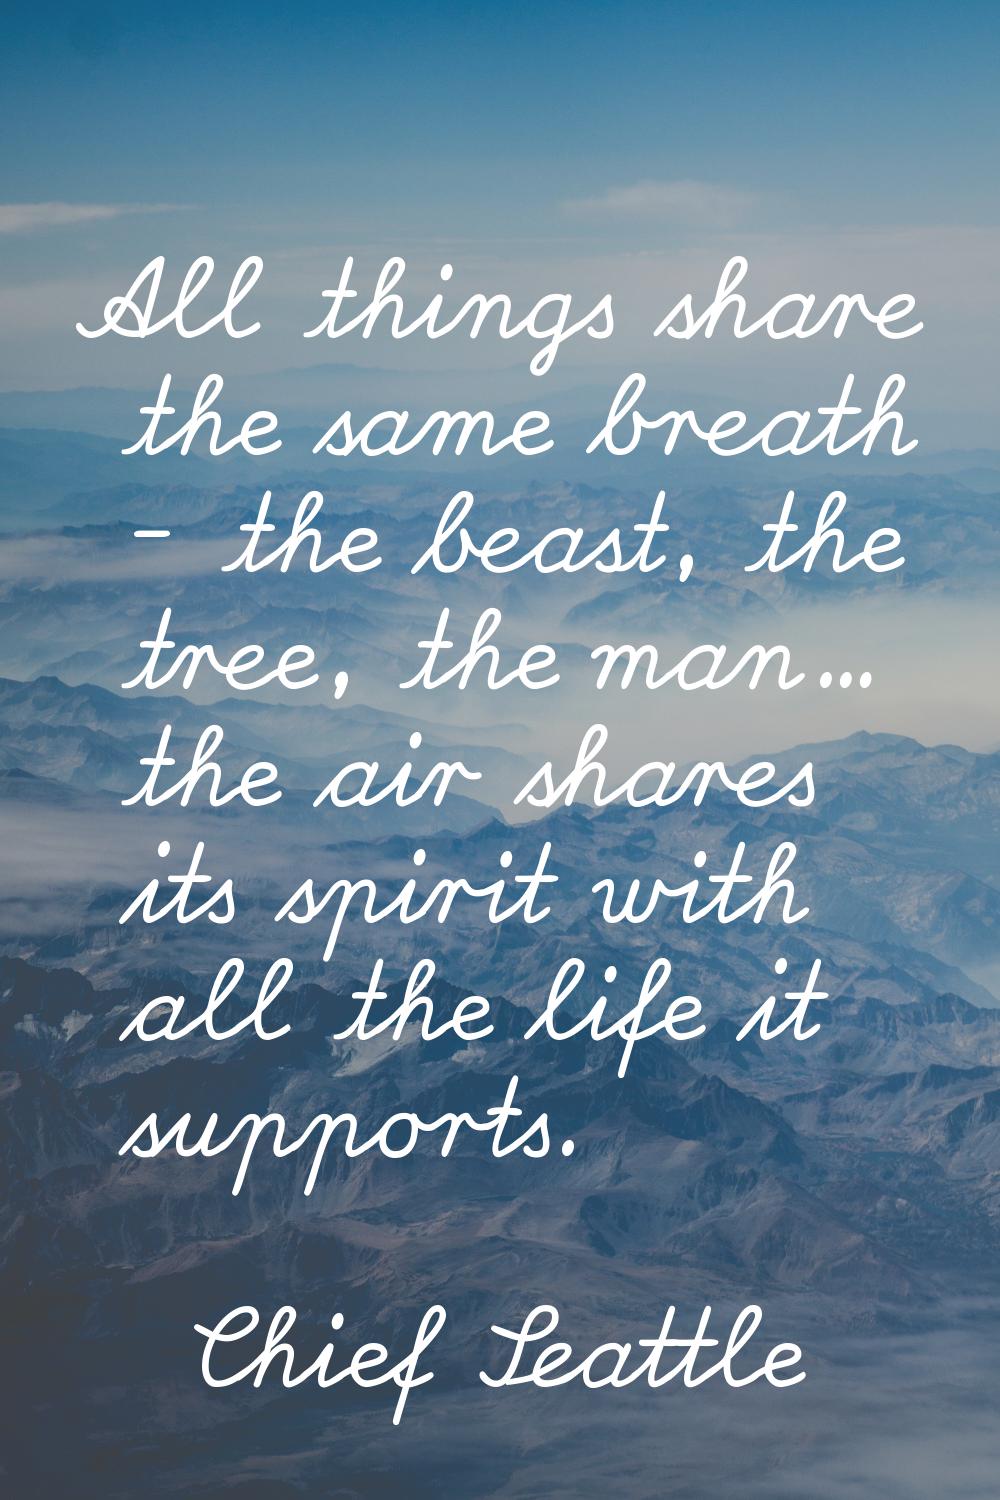 All things share the same breath - the beast, the tree, the man... the air shares its spirit with a